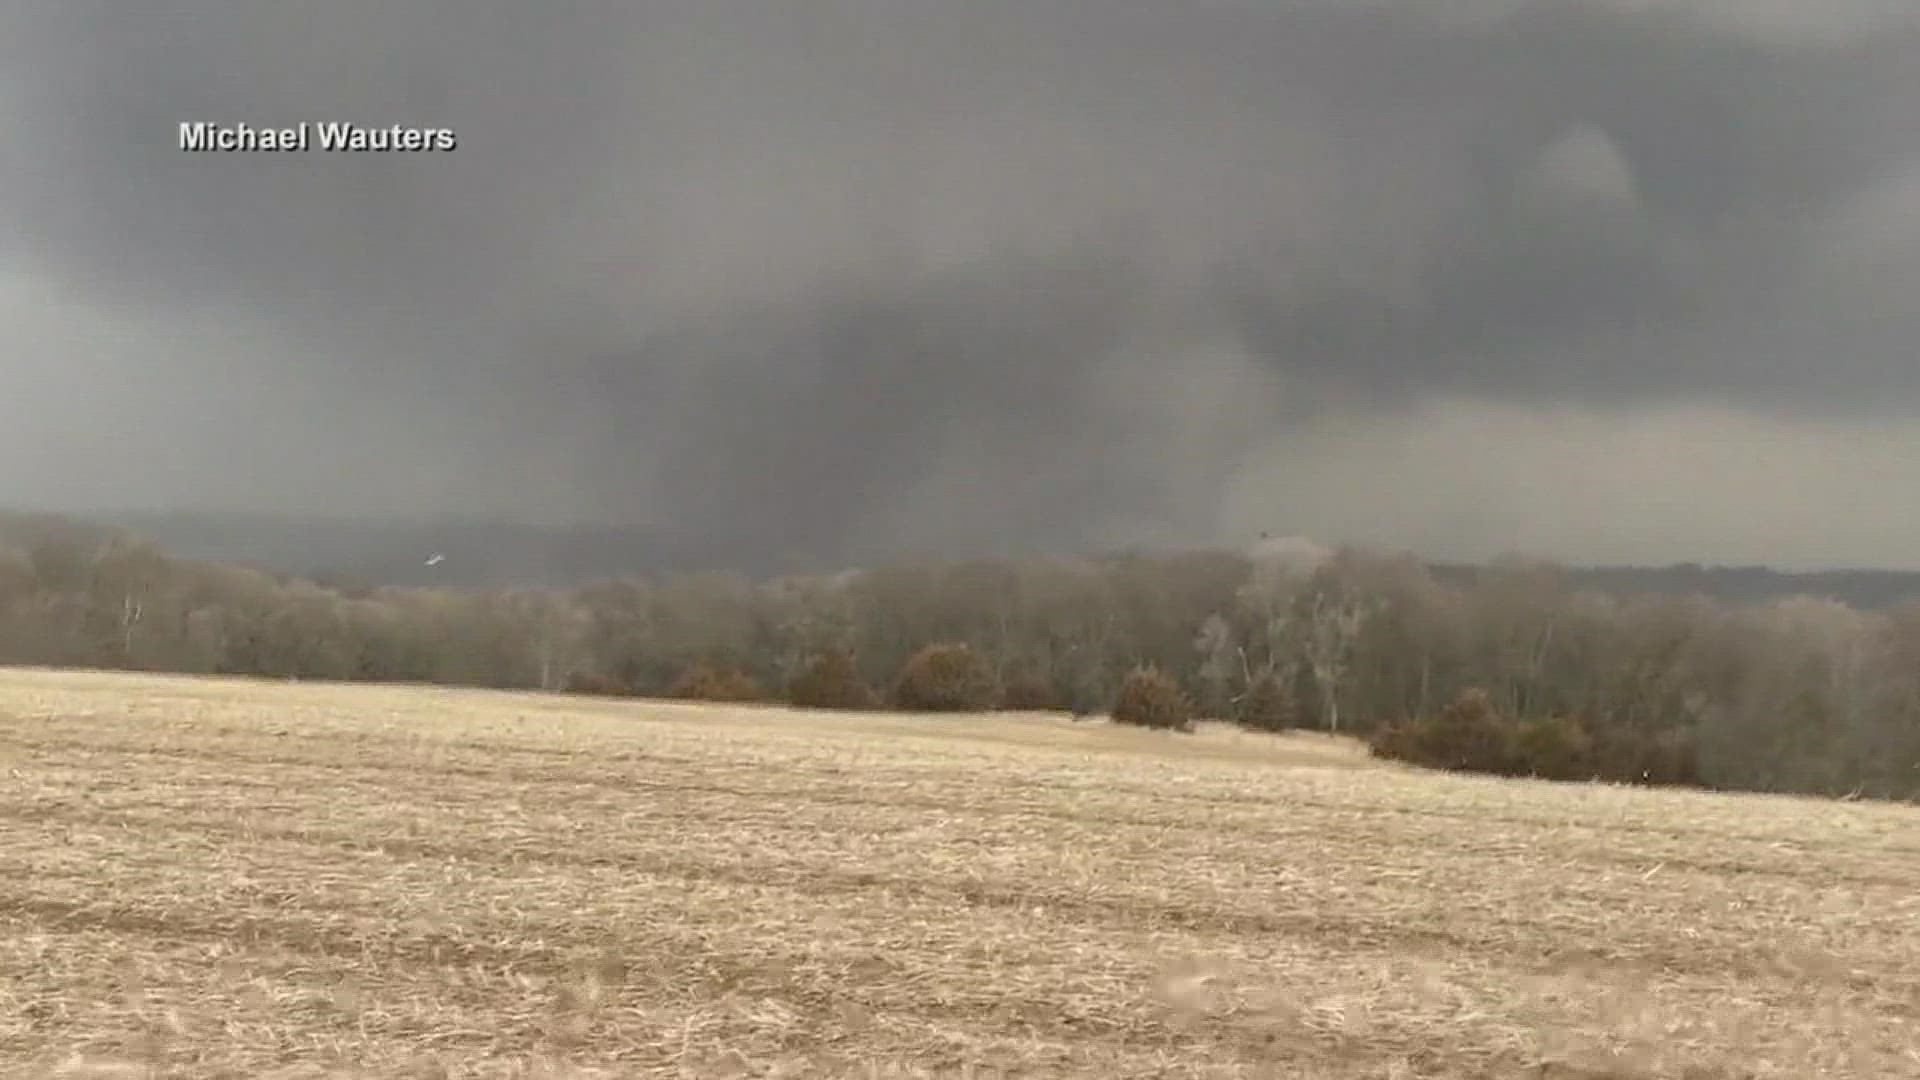 This tornado remained on the ground for 69.5 miles and had estimated peak winds at 170 mph, according to a survey from the National Weather Service.